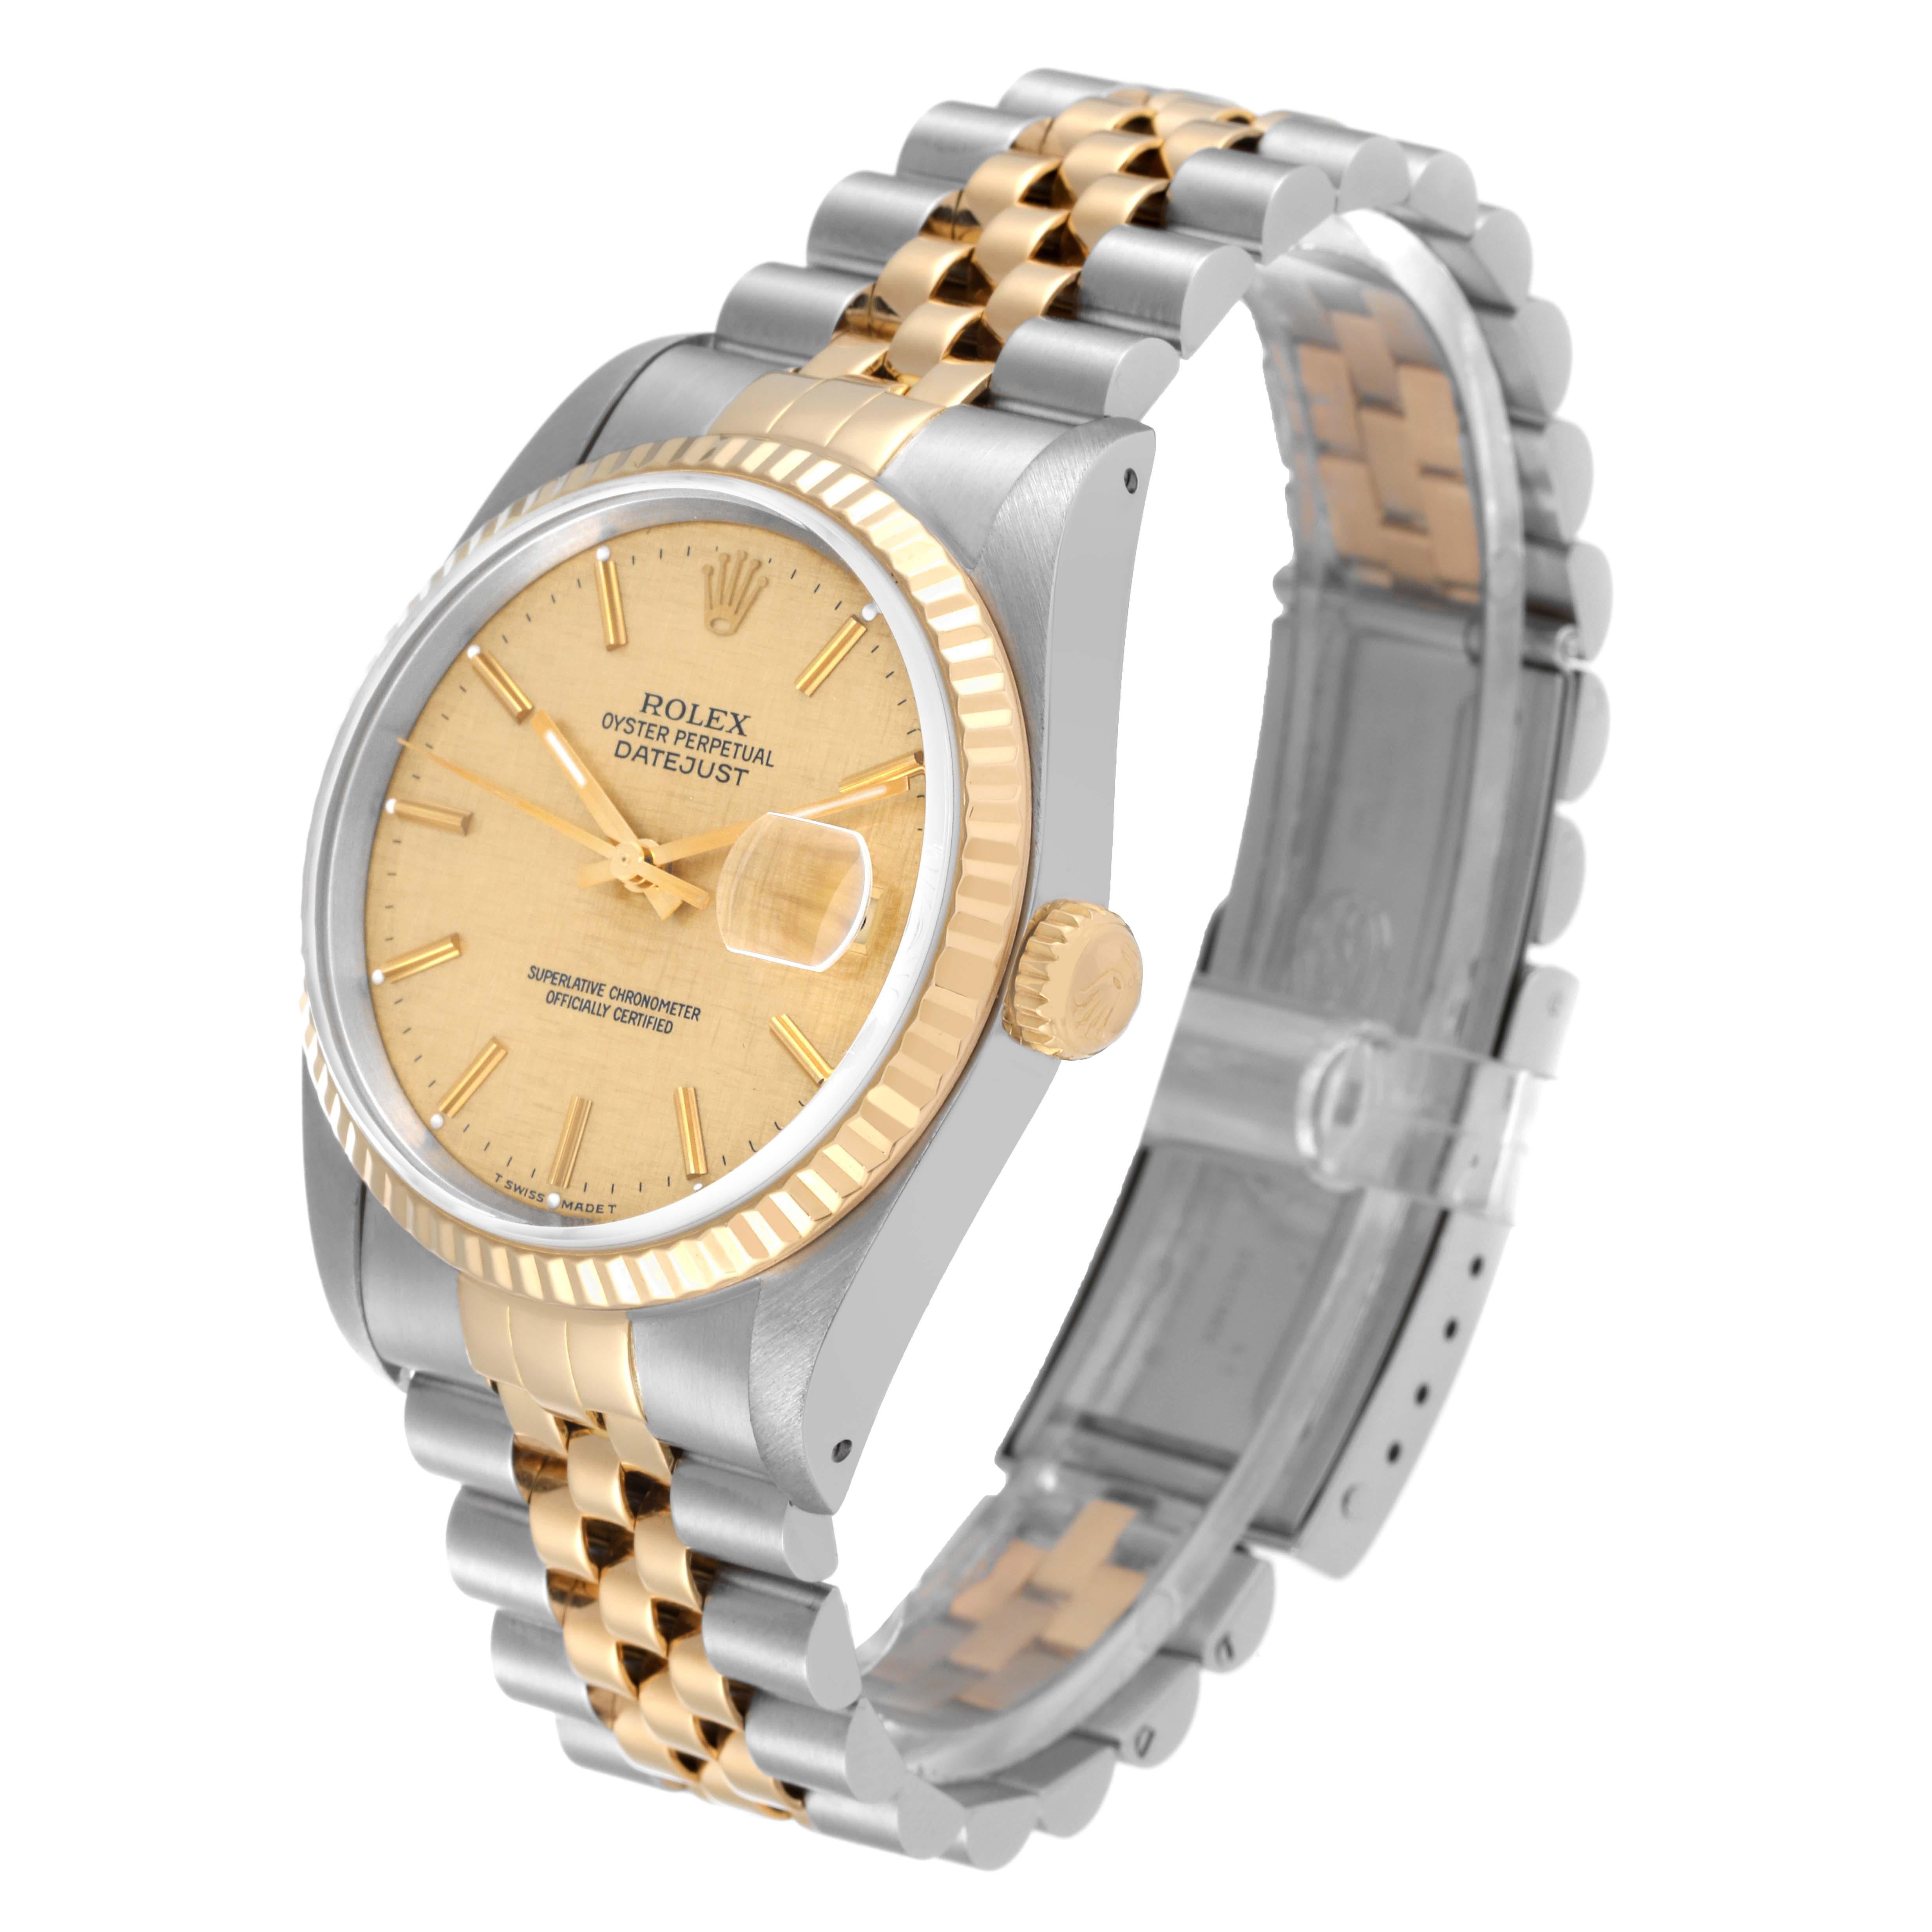 datejust champagne dial